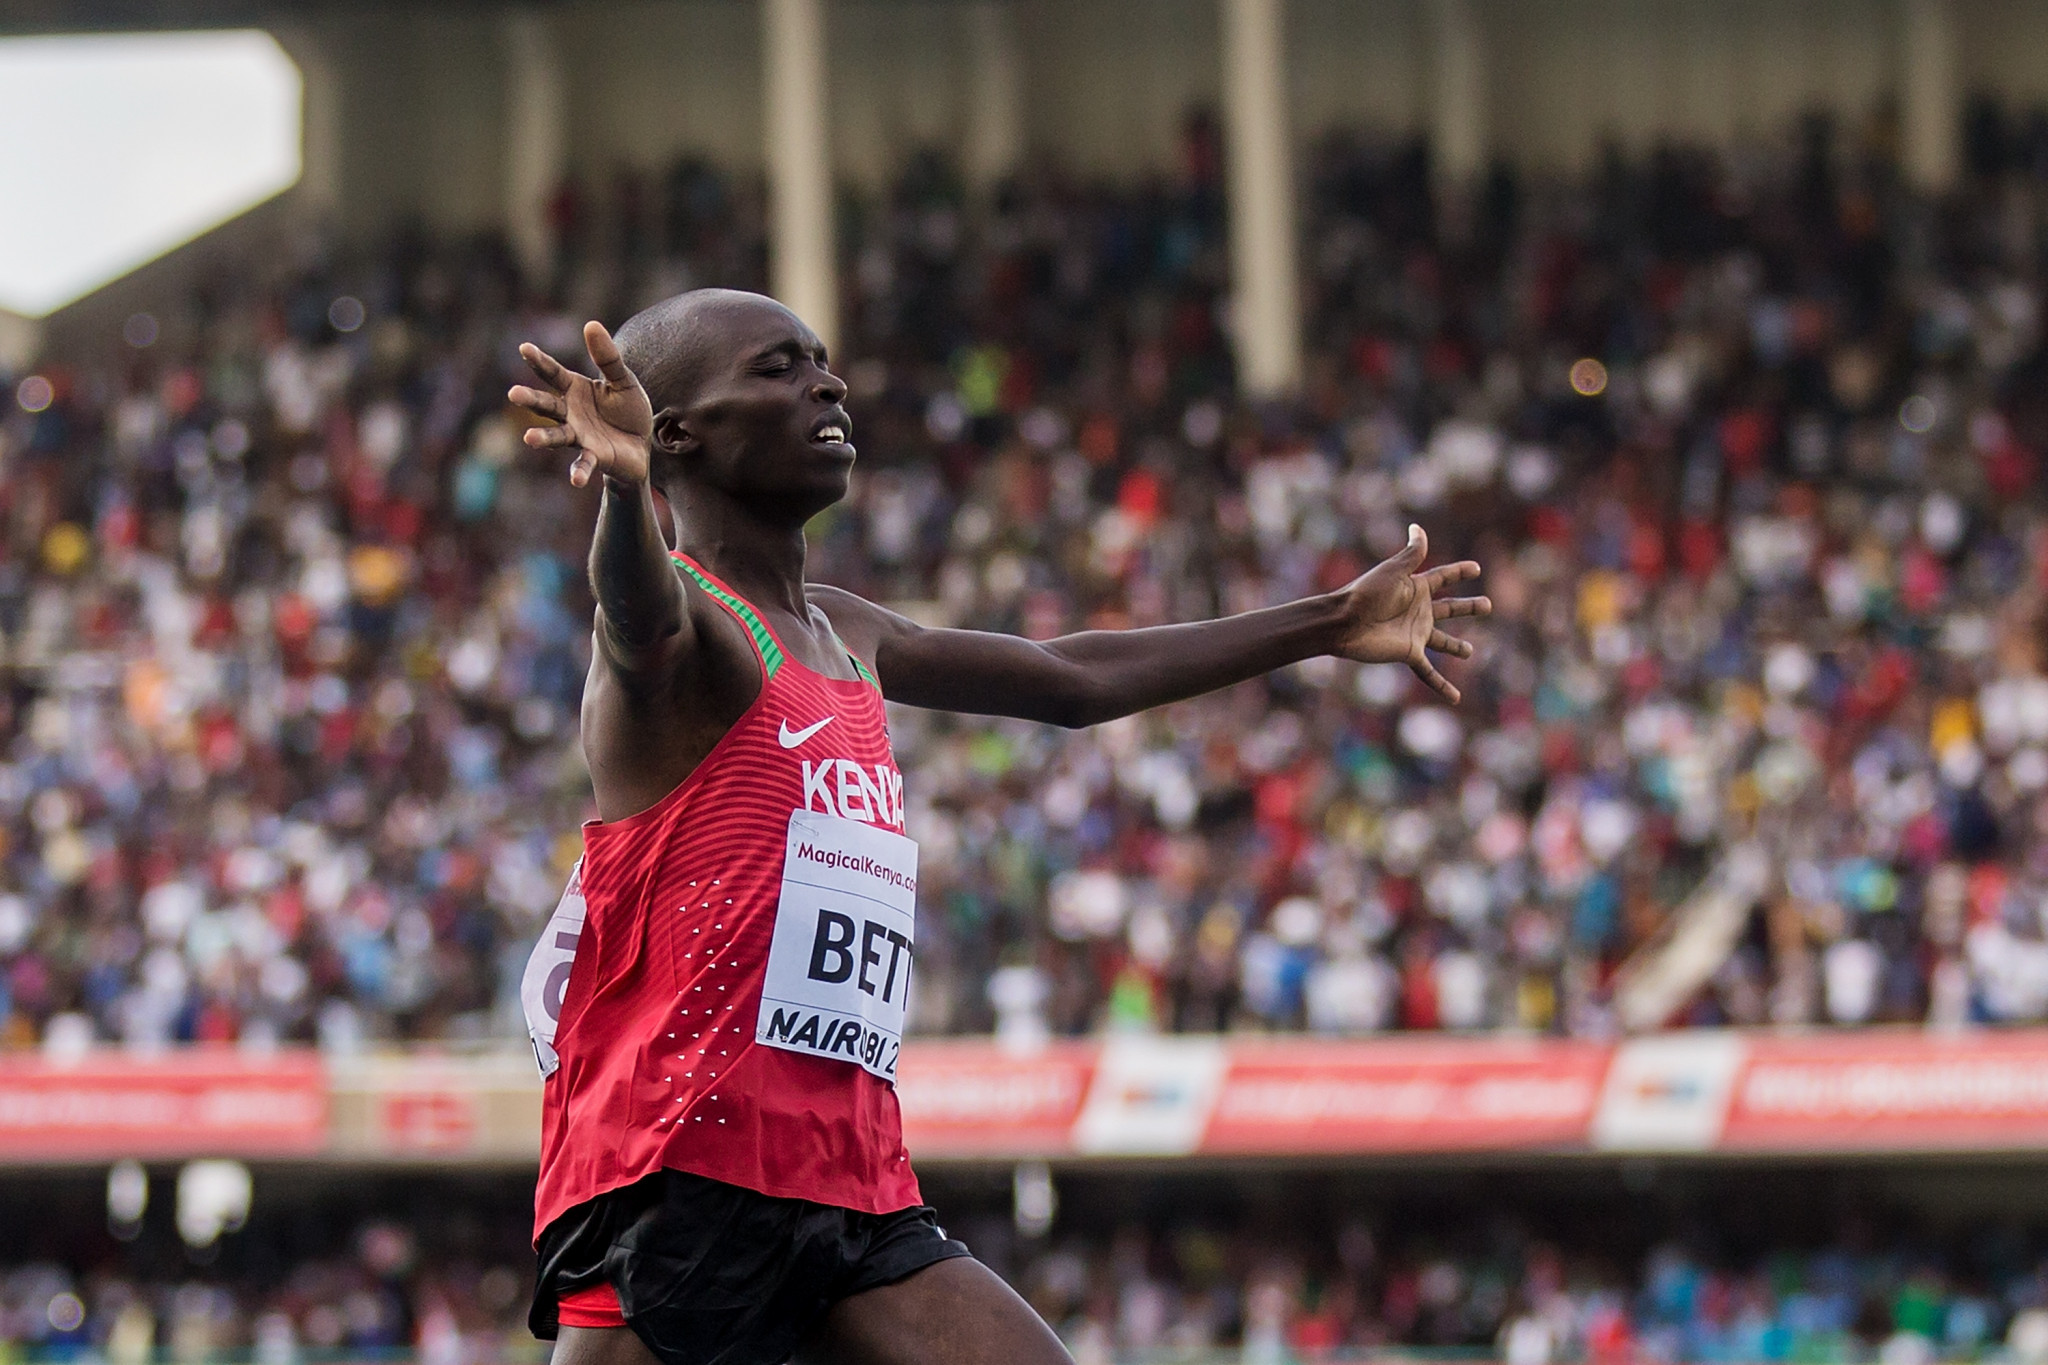 Vast crowds at the Under-18 World Athletics Championships have prompted suggestions Kenya could host the senior event ©Getty Images